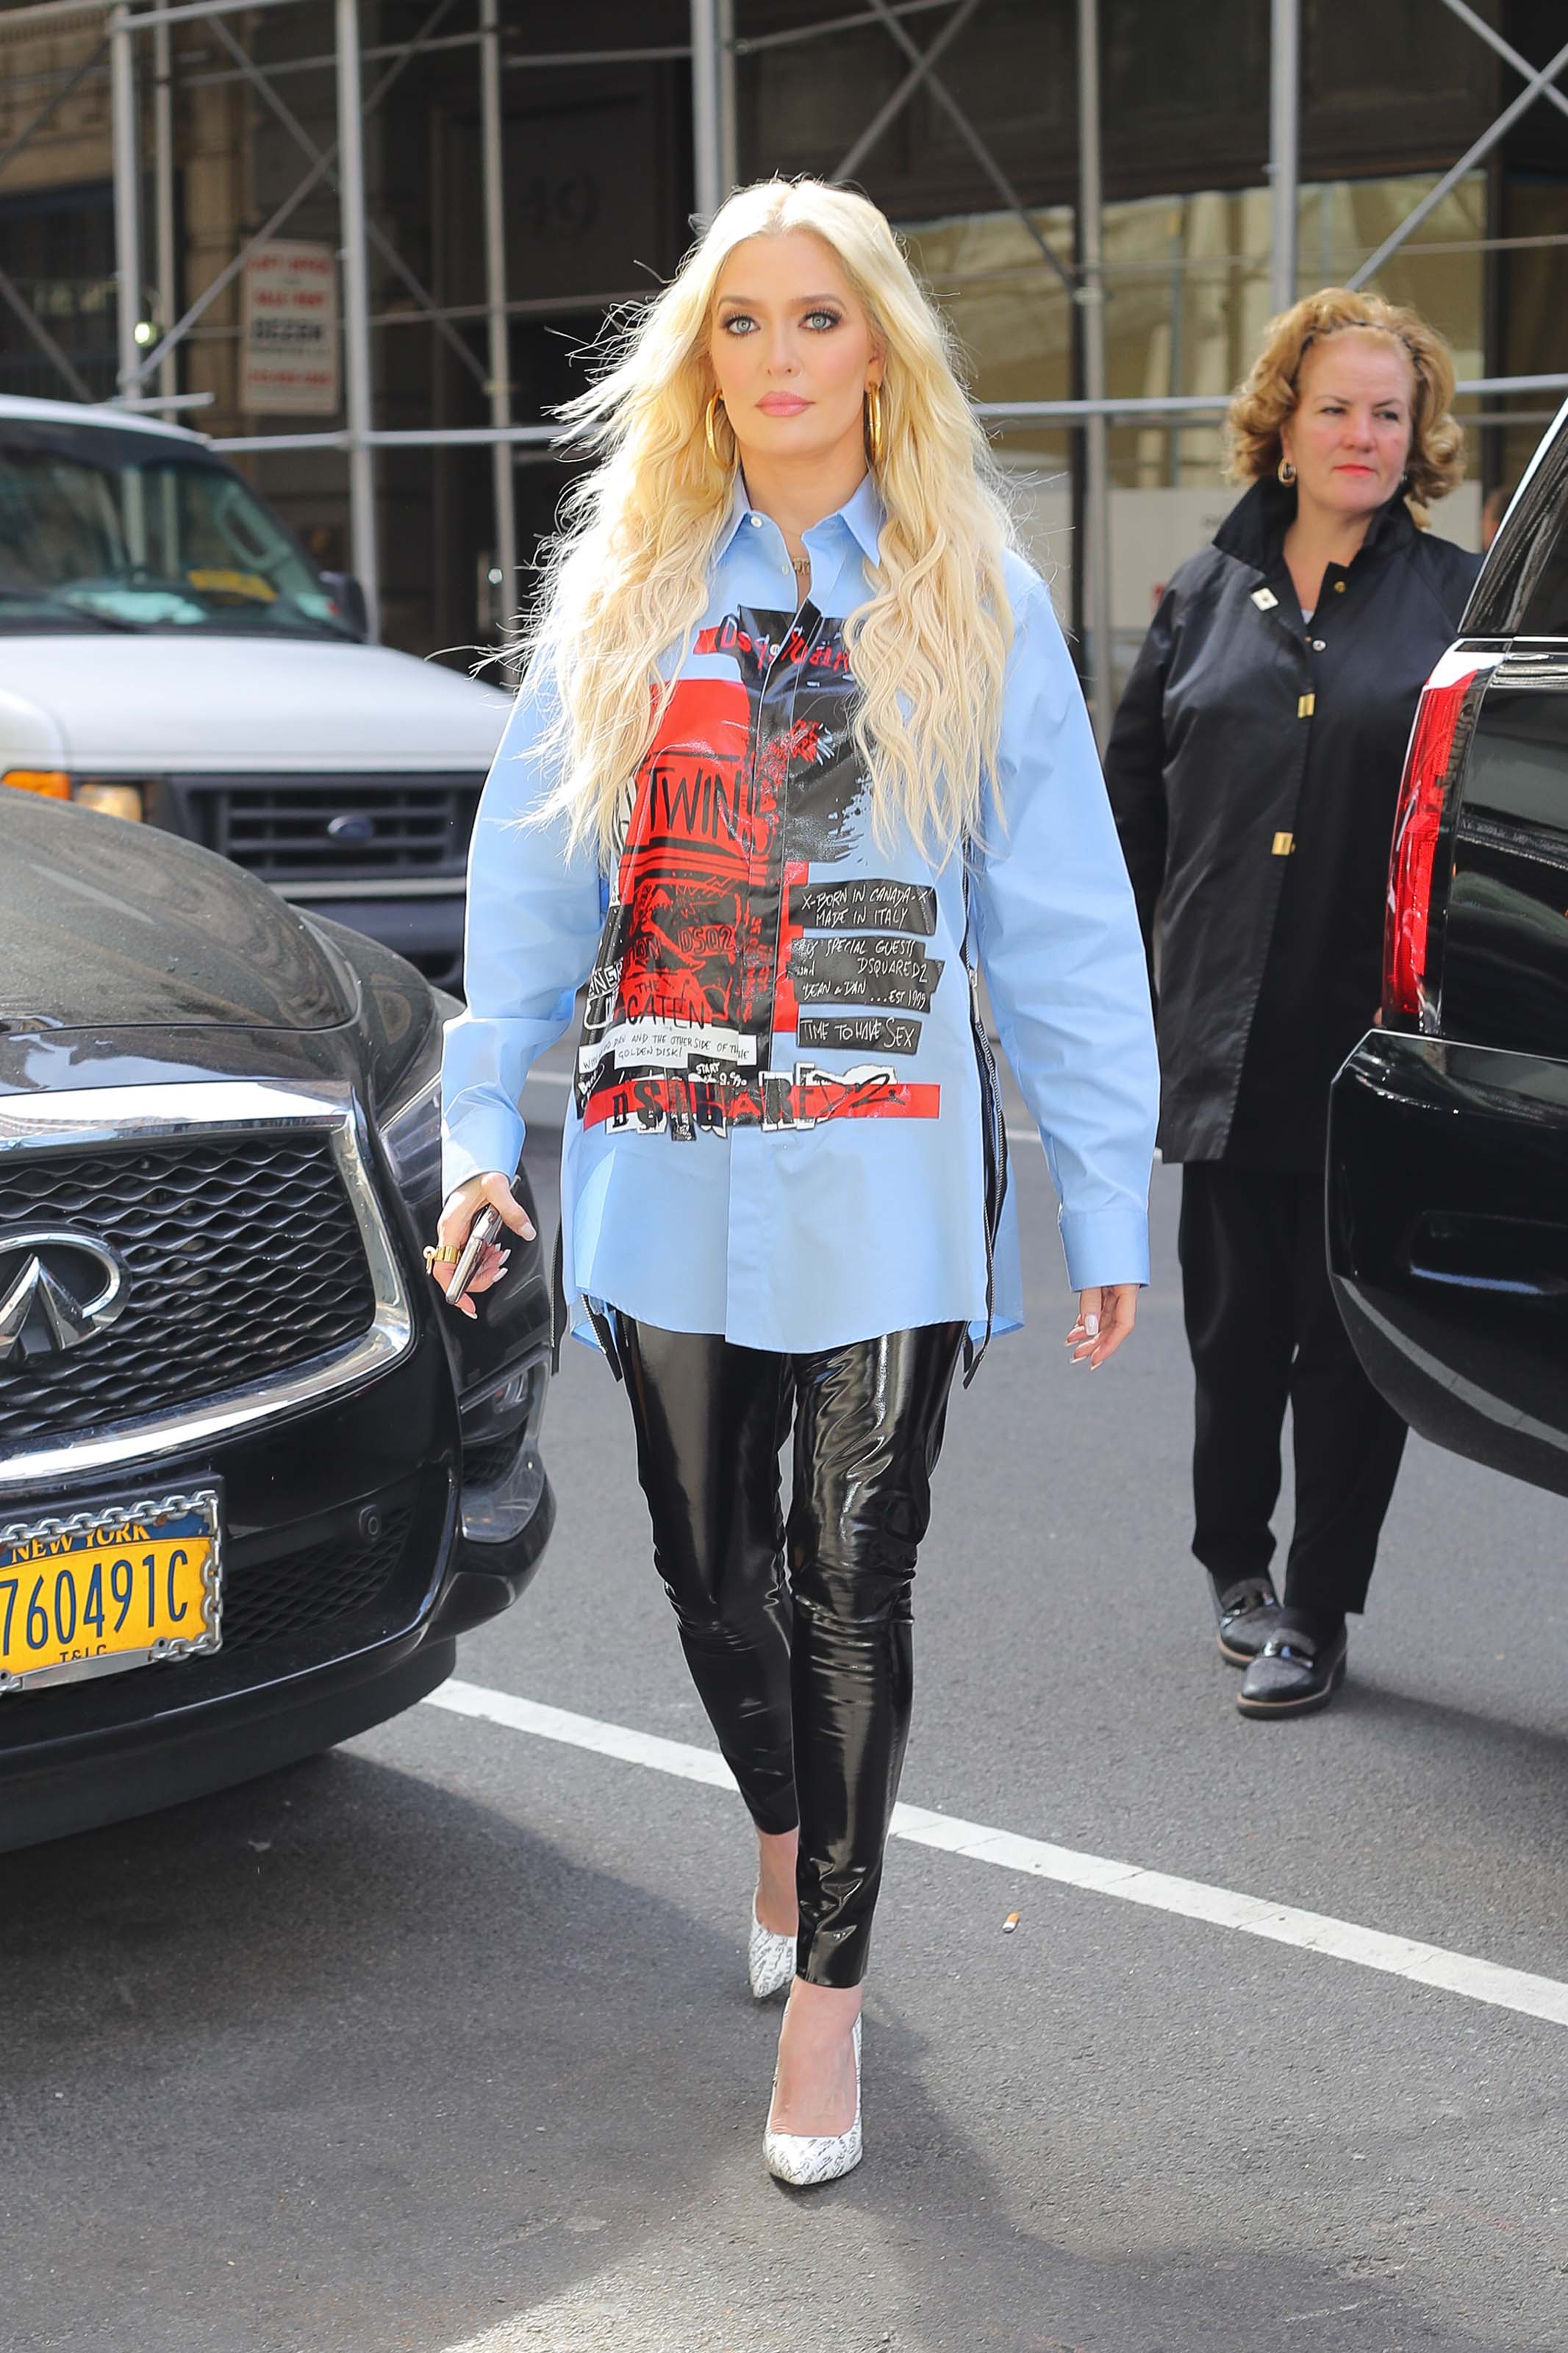 Erika Jayne out and about in NYC